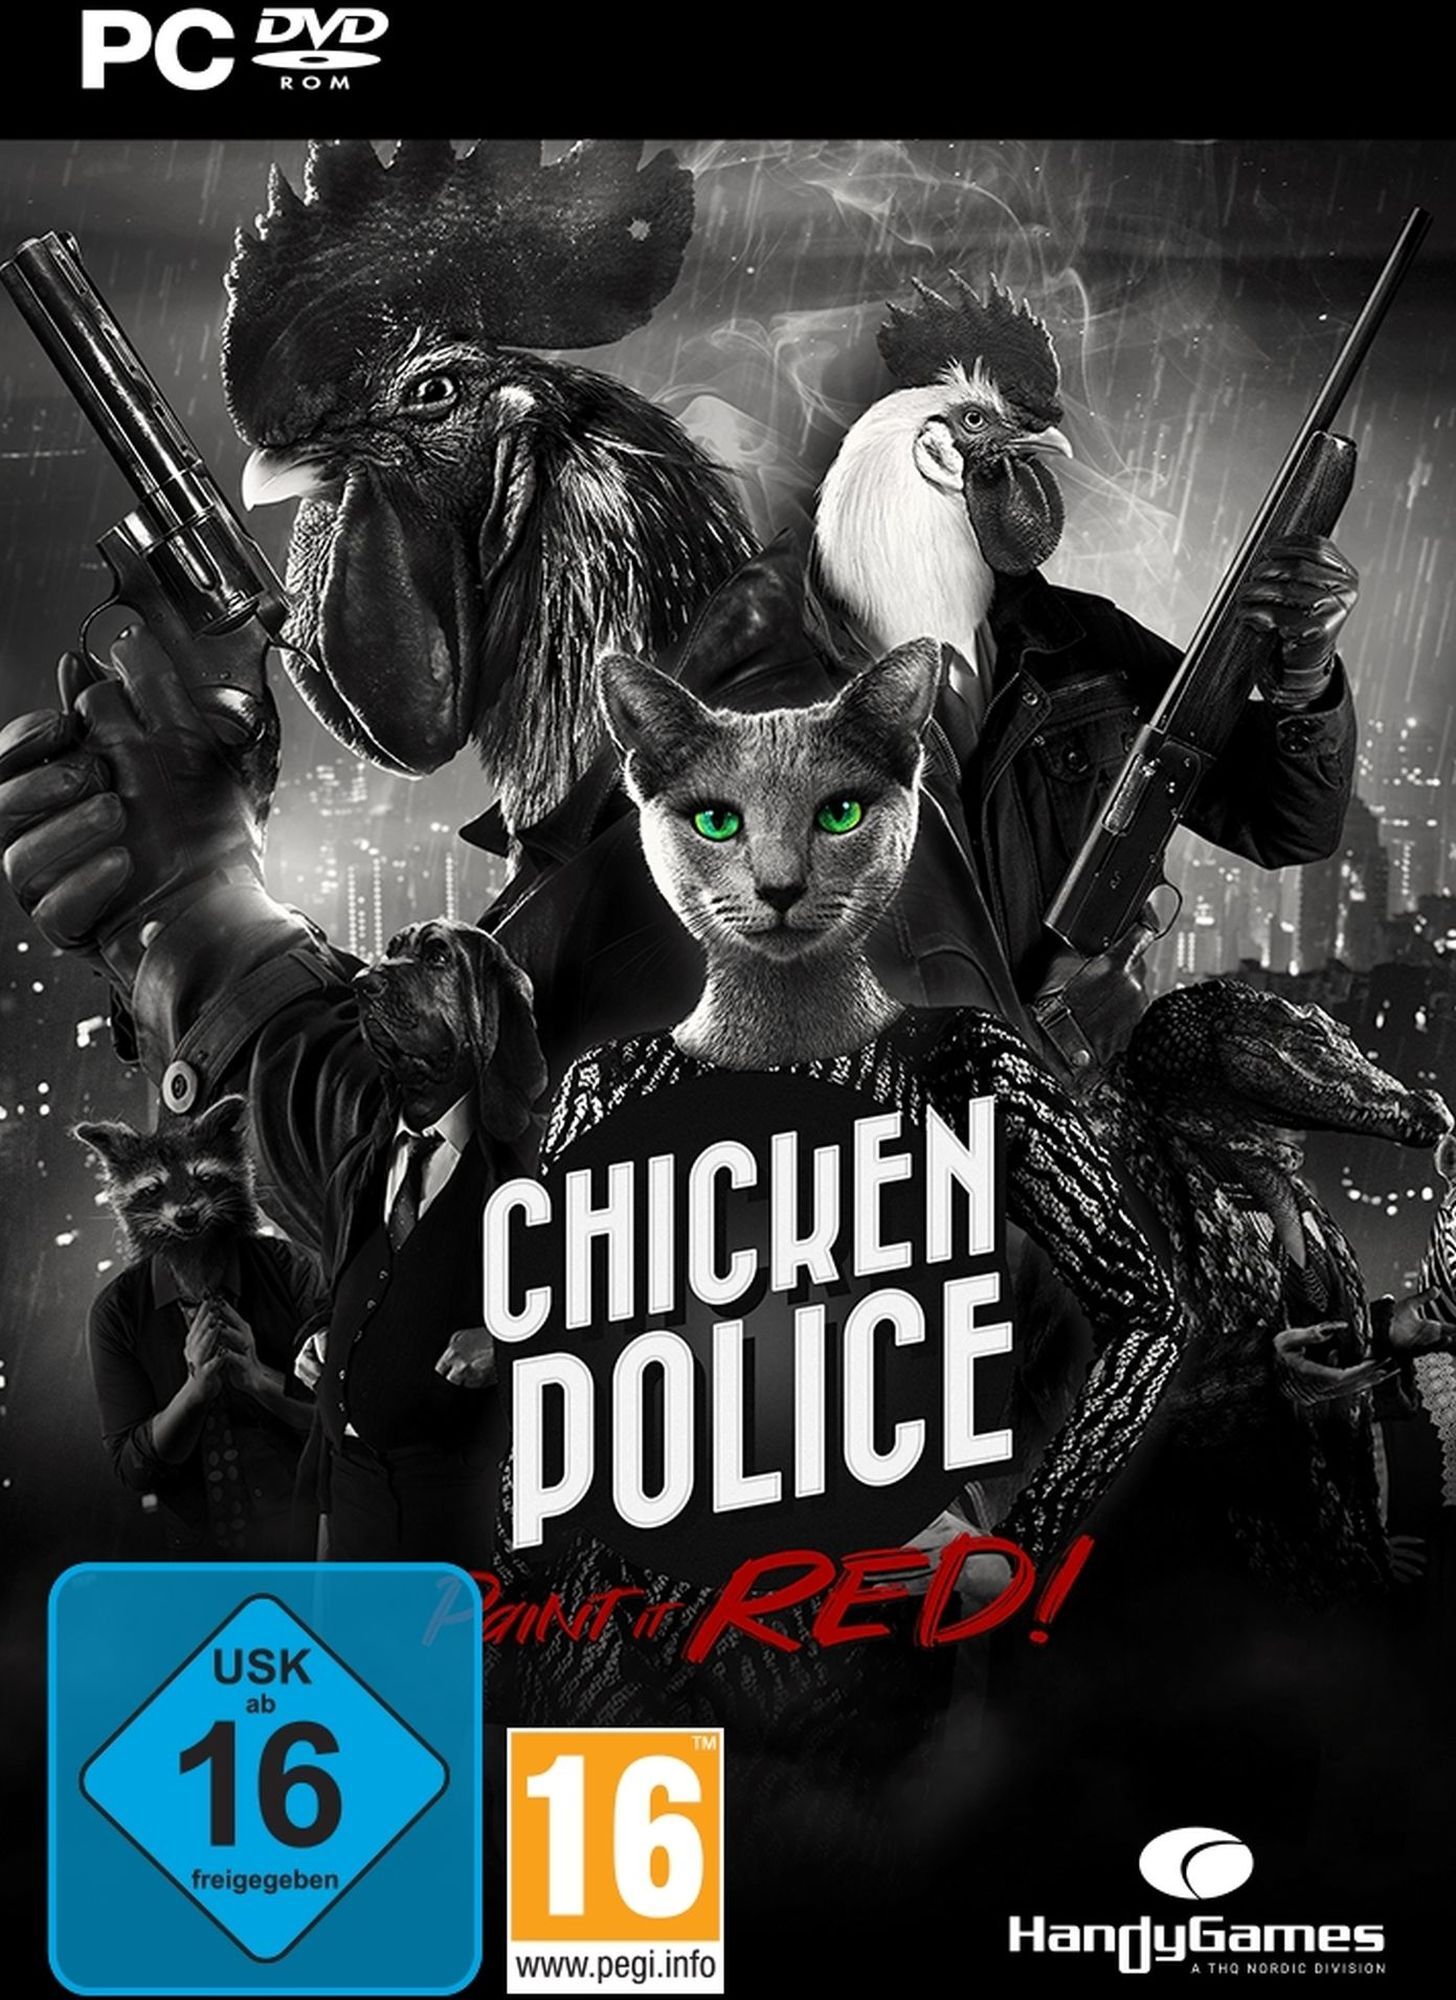 THQ Nordic - Chicken Police: Paint it RED! [PC] (F/I)